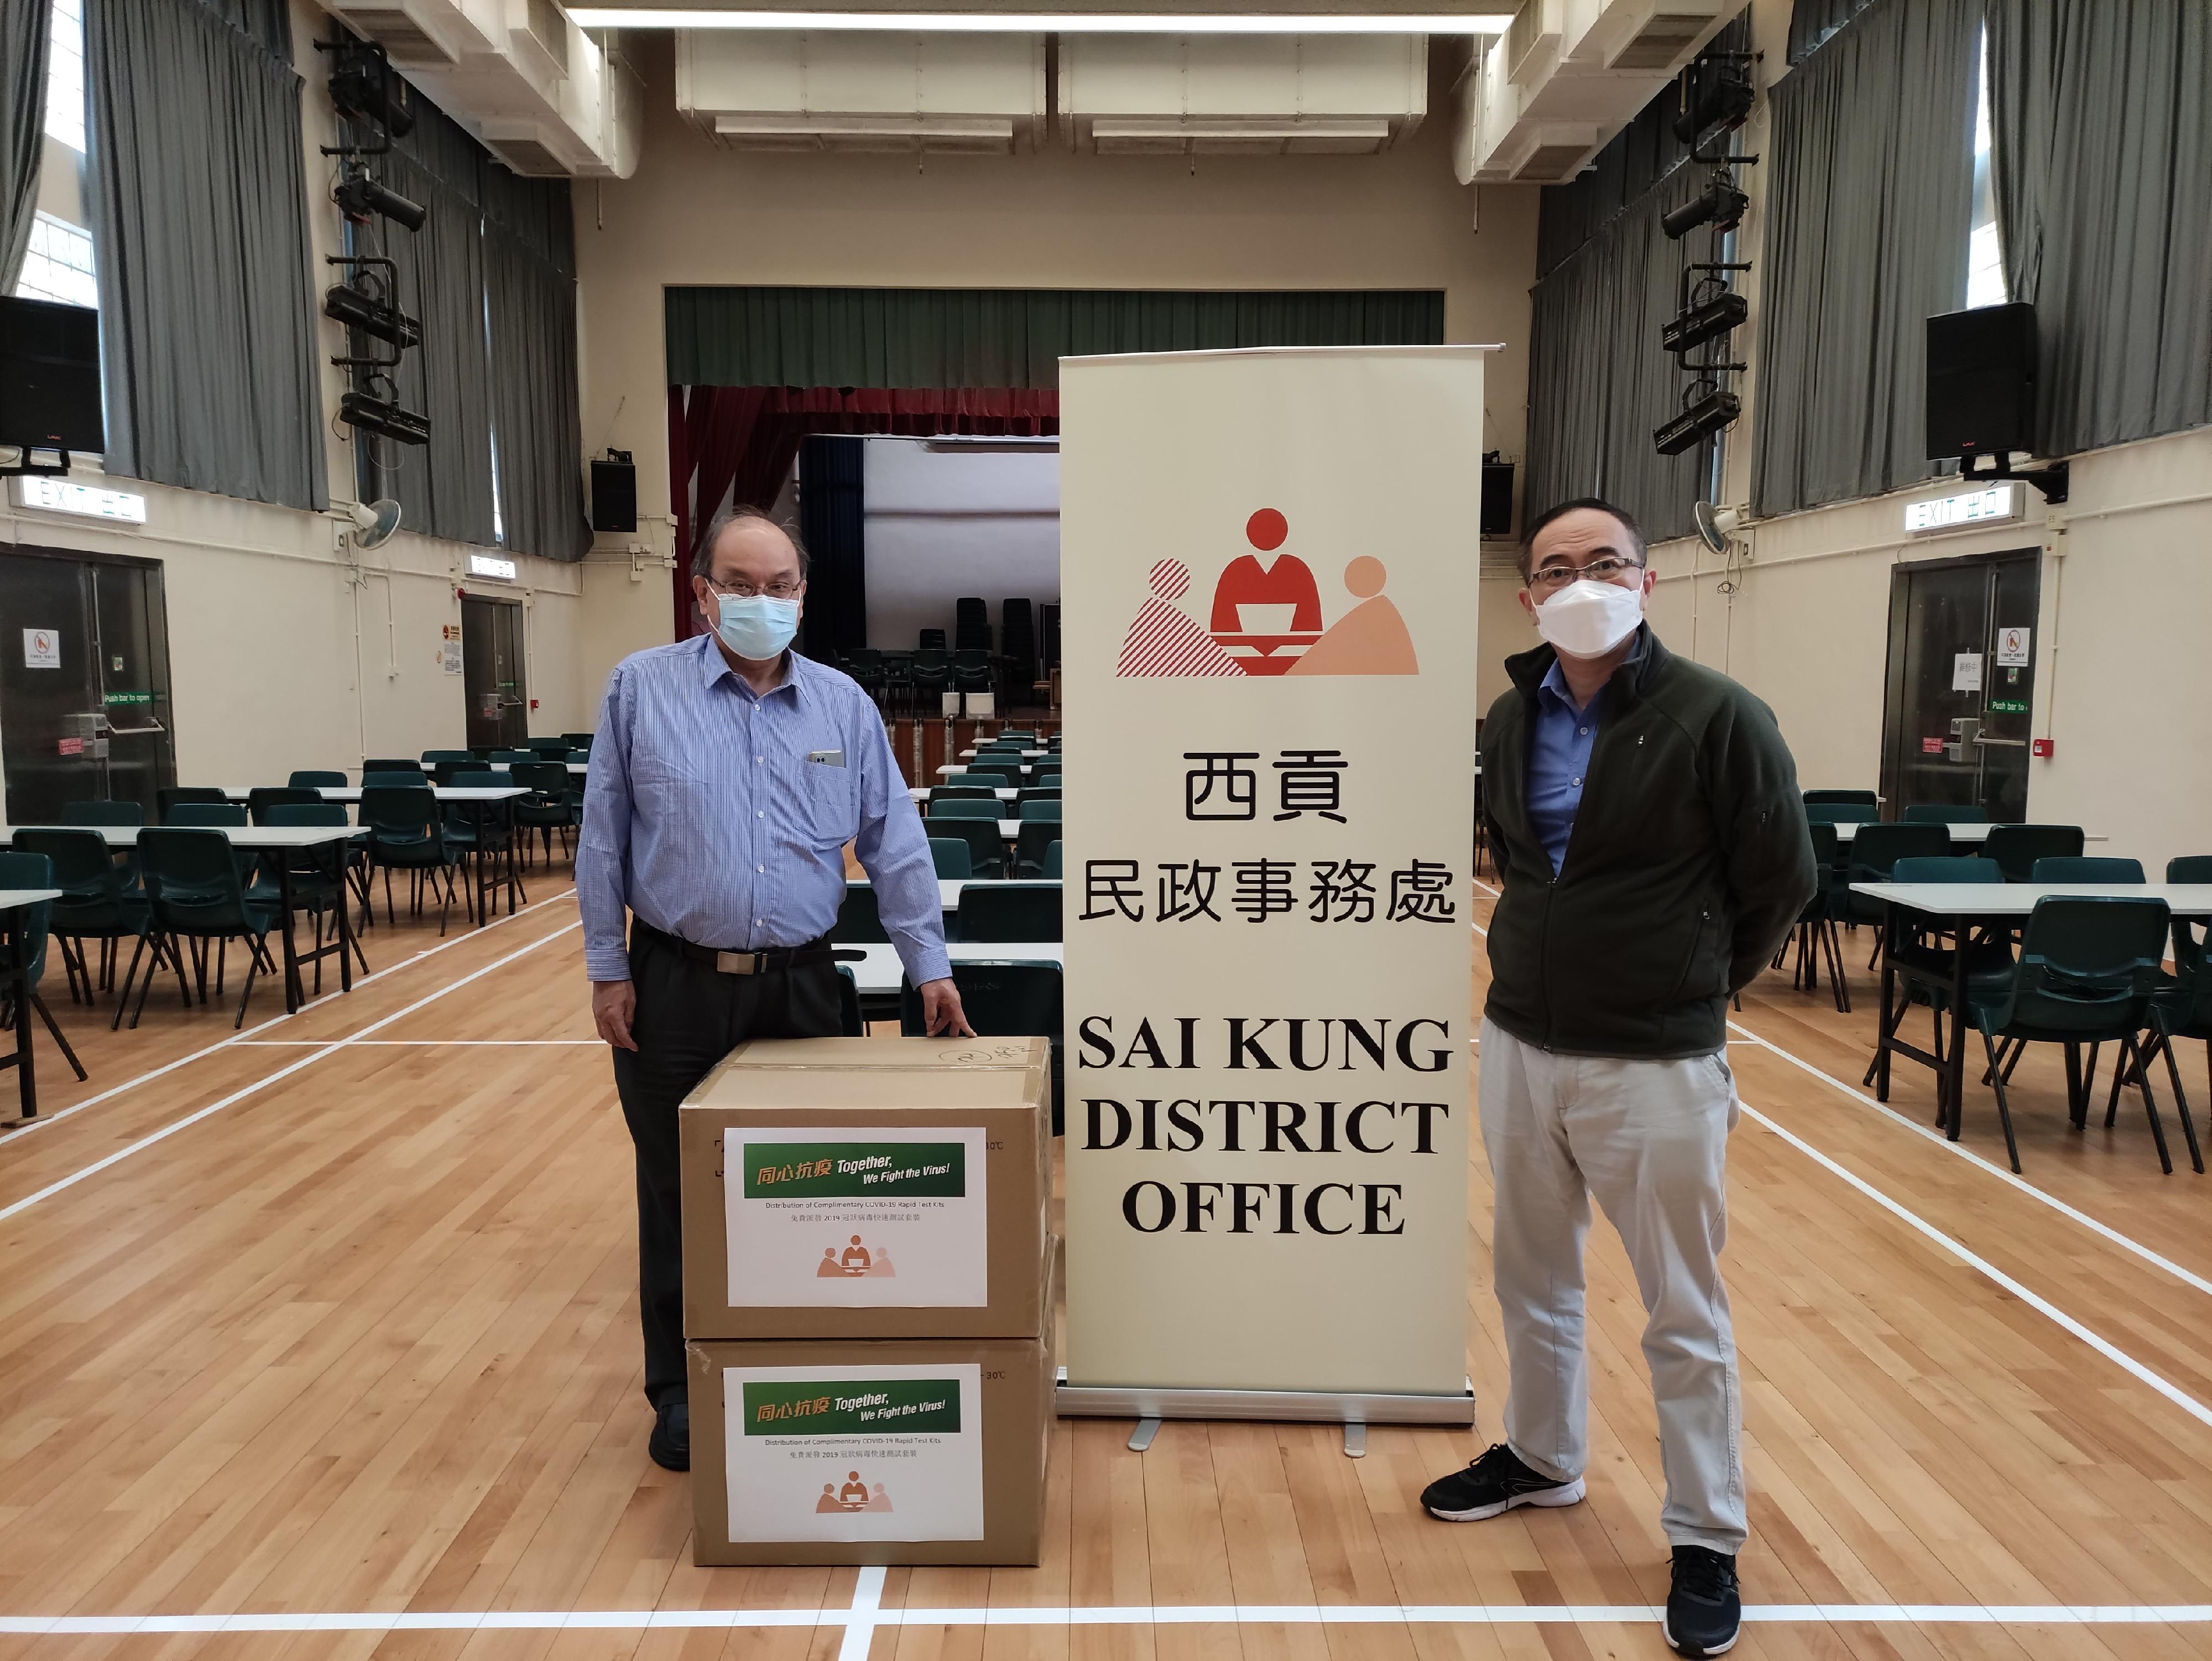 The Sai Kung District Office today (February 28) distributed COVID-19 rapid test kits to households, cleansing workers and property management staff living and working in On Ning Garden Block 5 in Tseung Kwan O for voluntary testing through the property management company.